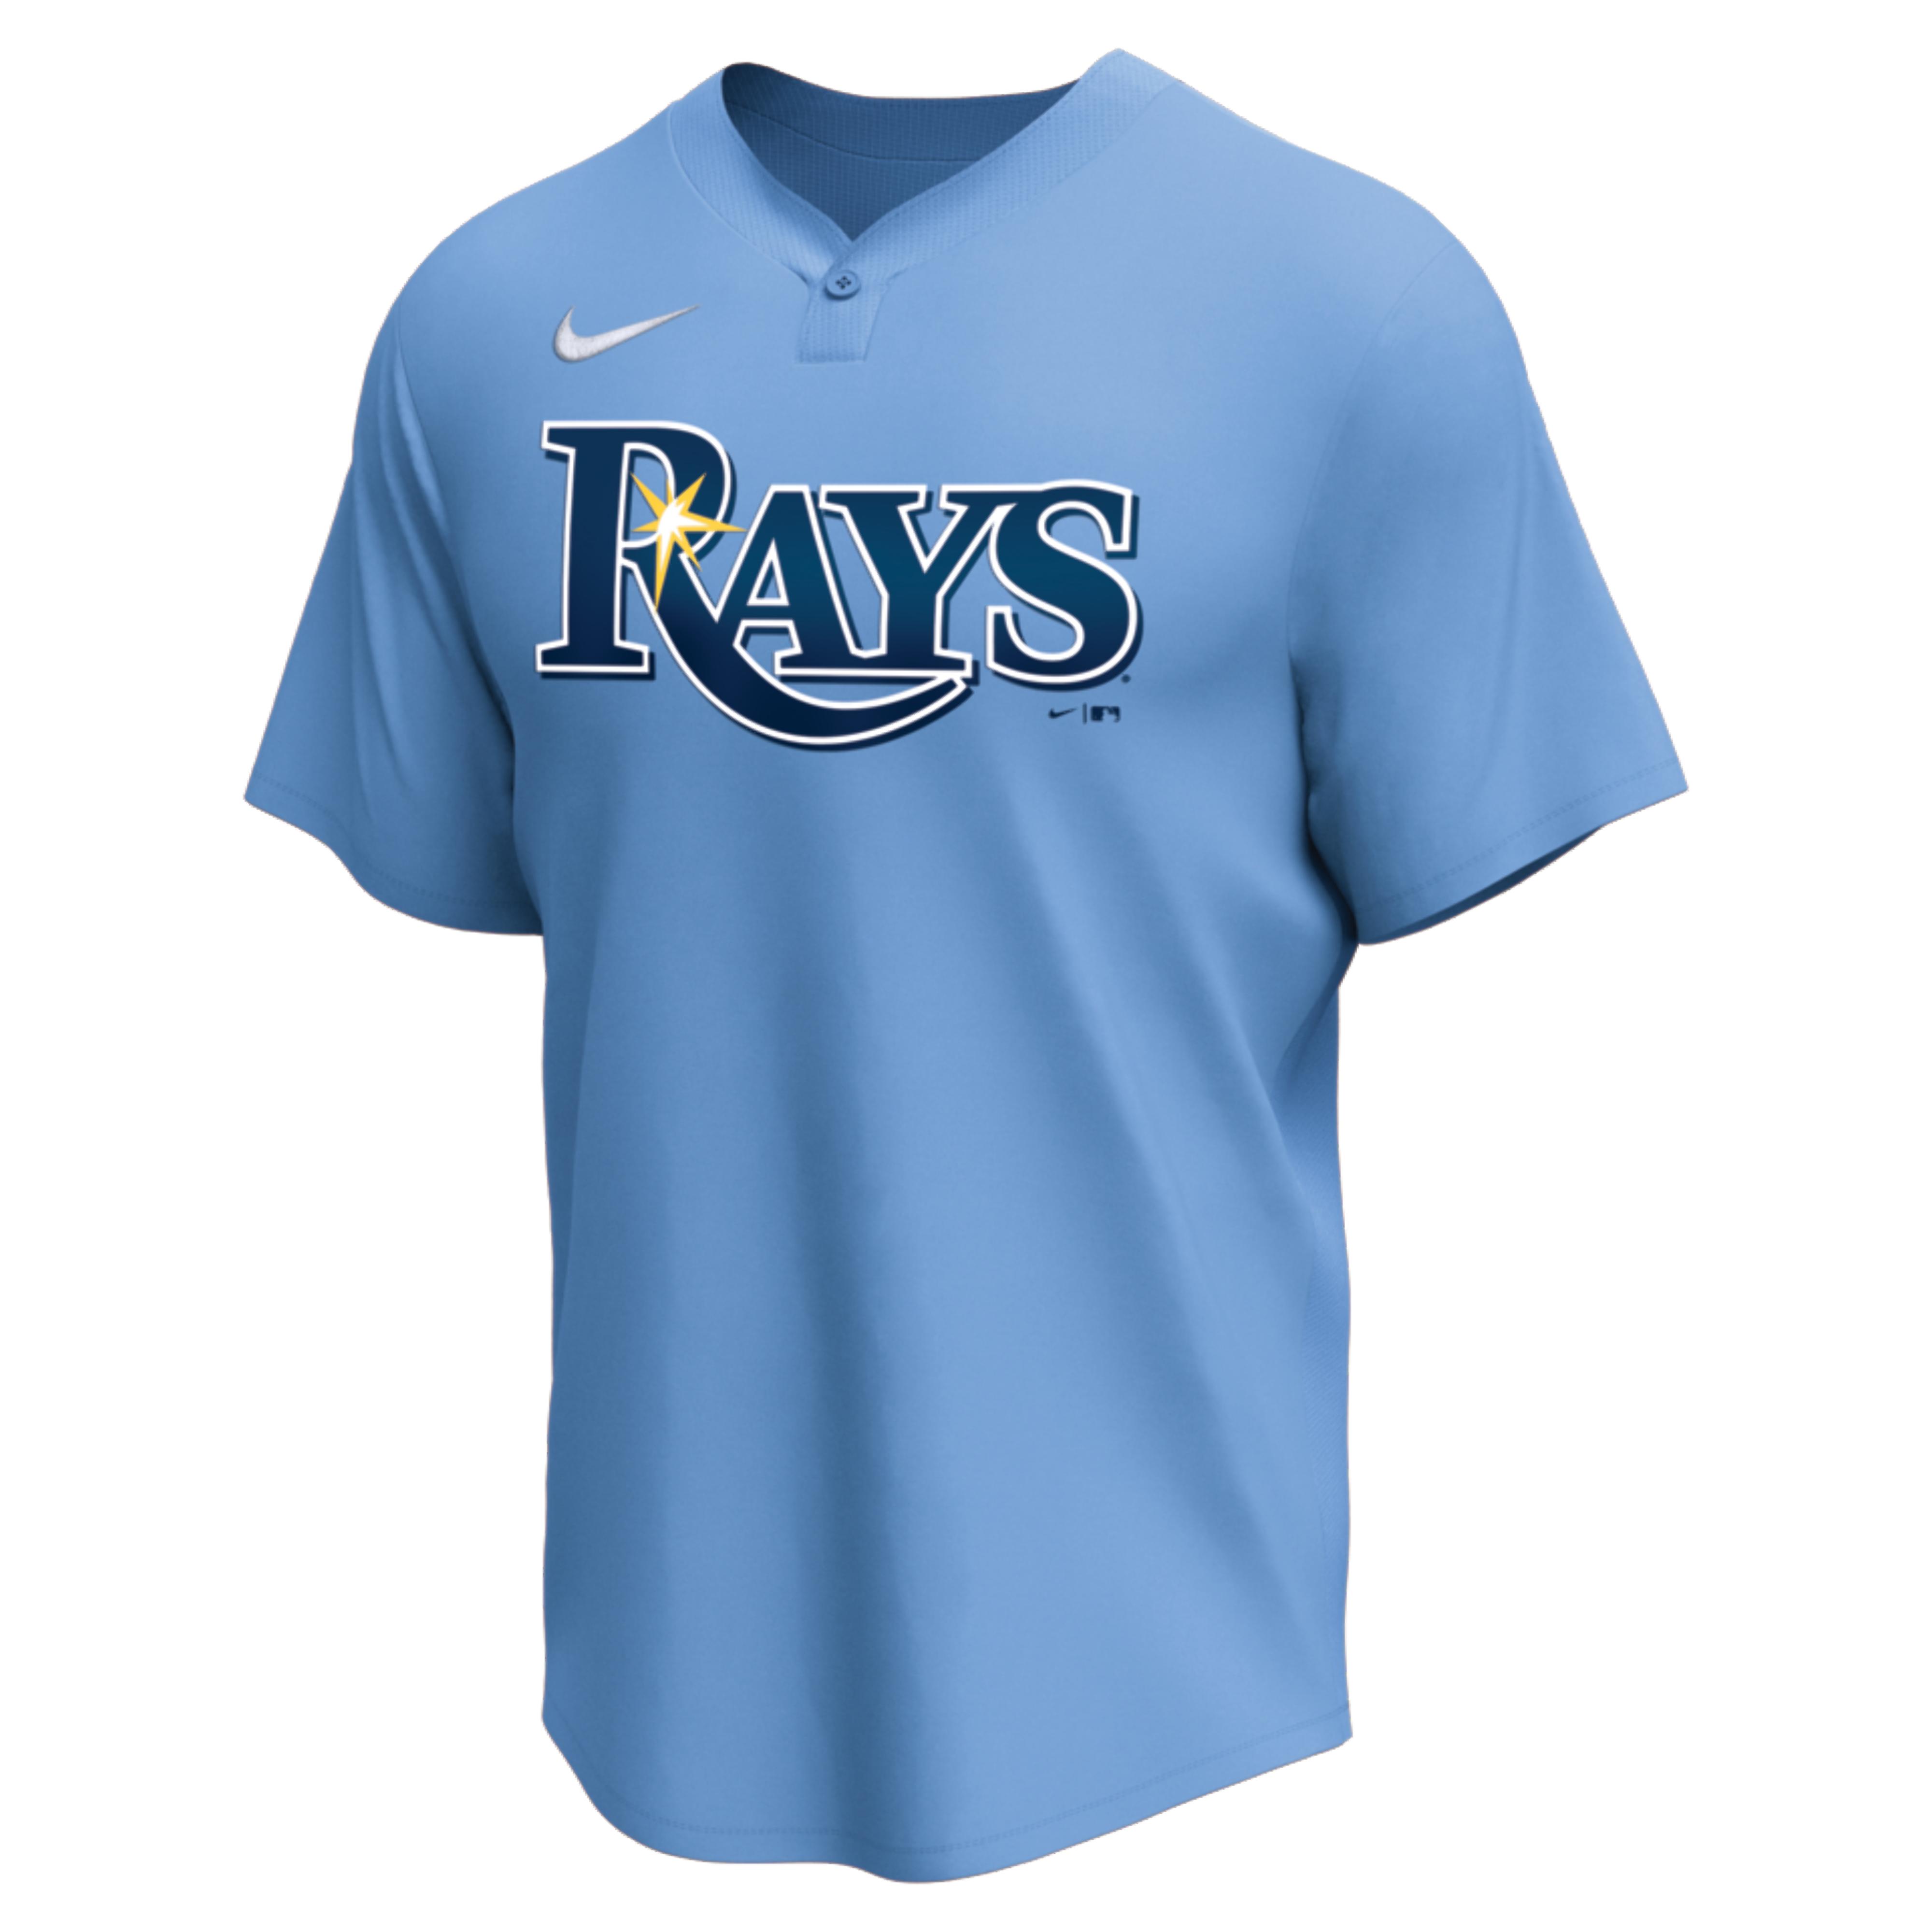 MLB on X: Reminder: These Rays throwback uniforms are 🔥! https